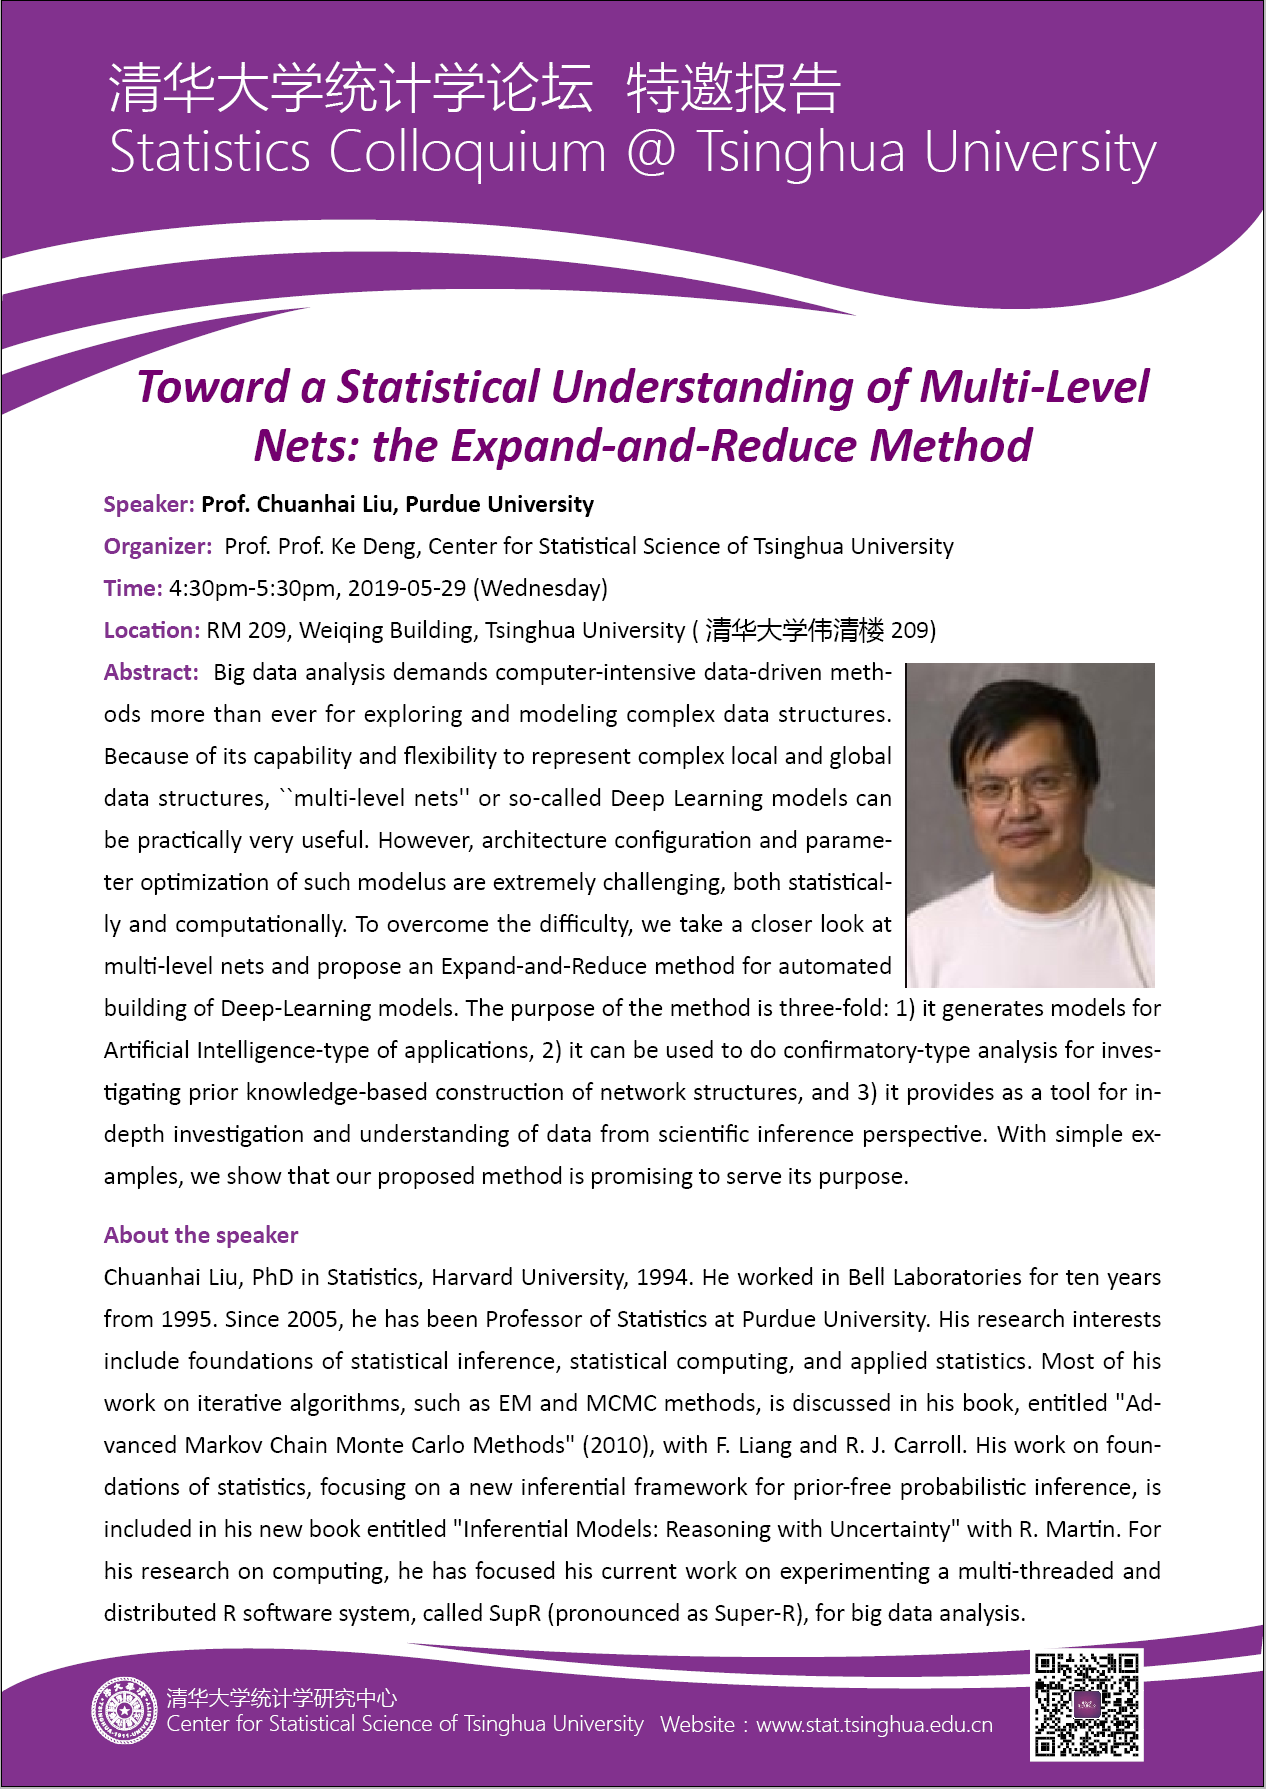 Toward a Statistical Understanding of Multi-Level Nets: the Expand-and-Reduce Method